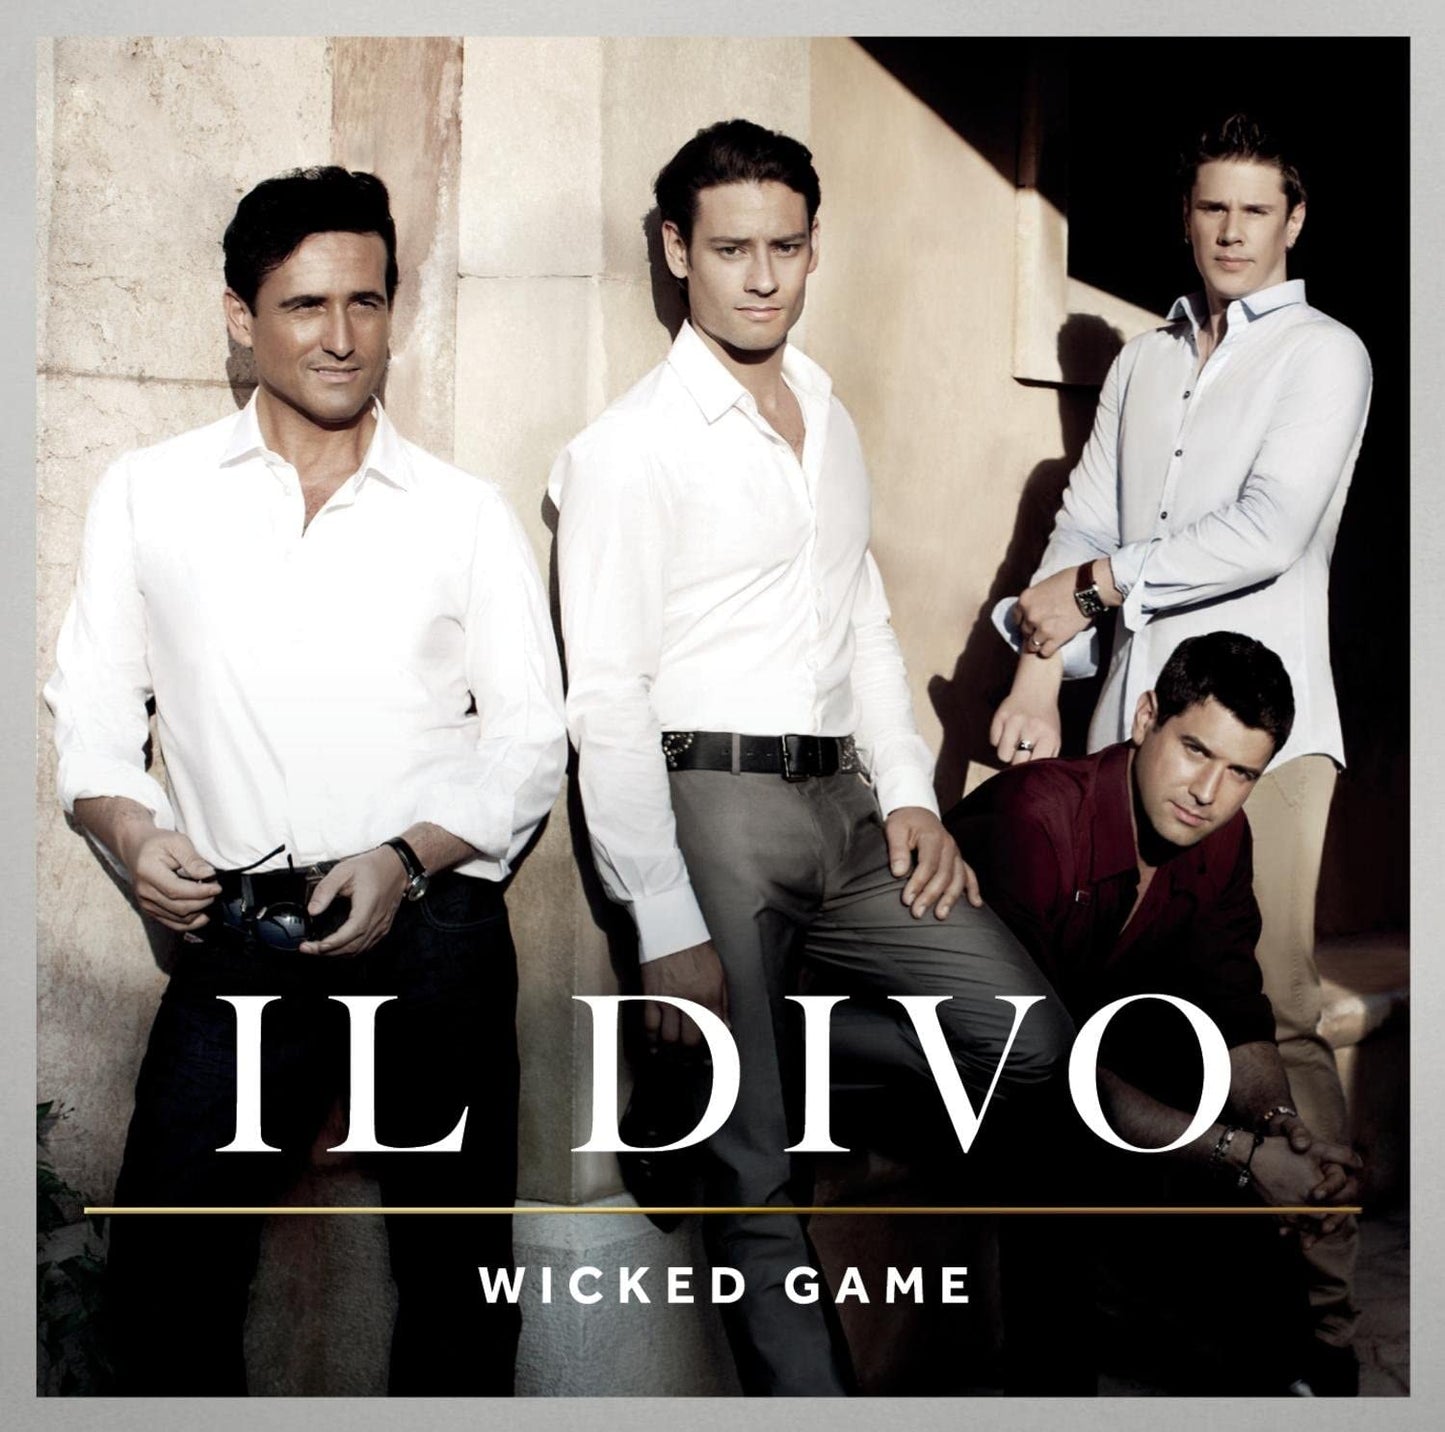 Wicked Game [Audio CD] Il Divo, Multi-Artistes and Mats Halling